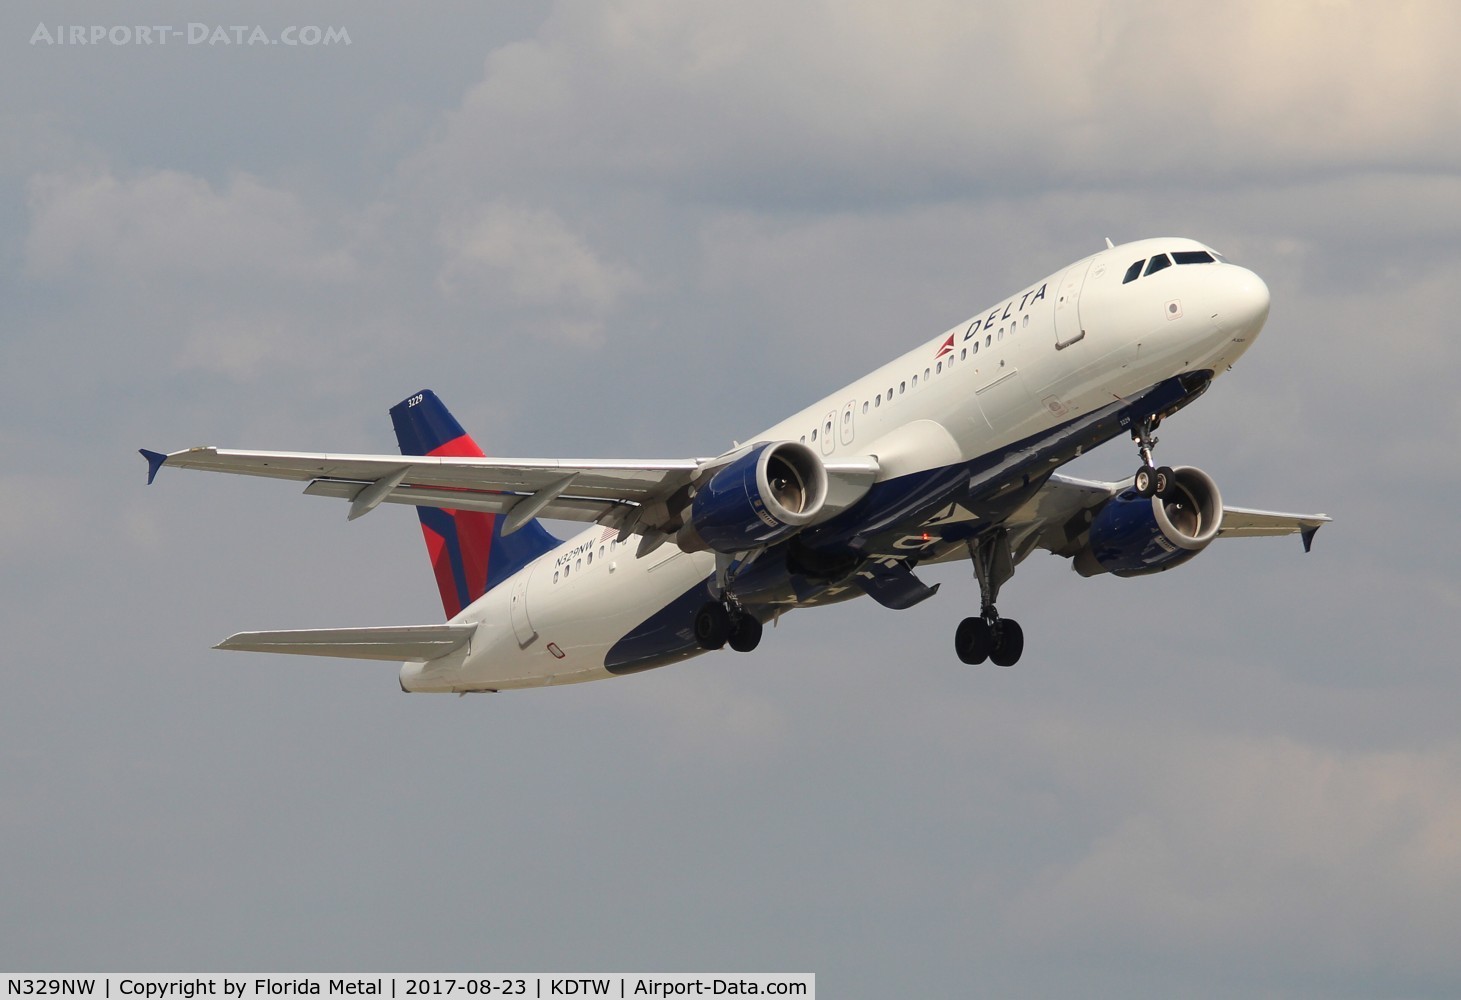 N329NW, 1992 Airbus A320-211 C/N 306, DAL A320 zx DTW-DCA